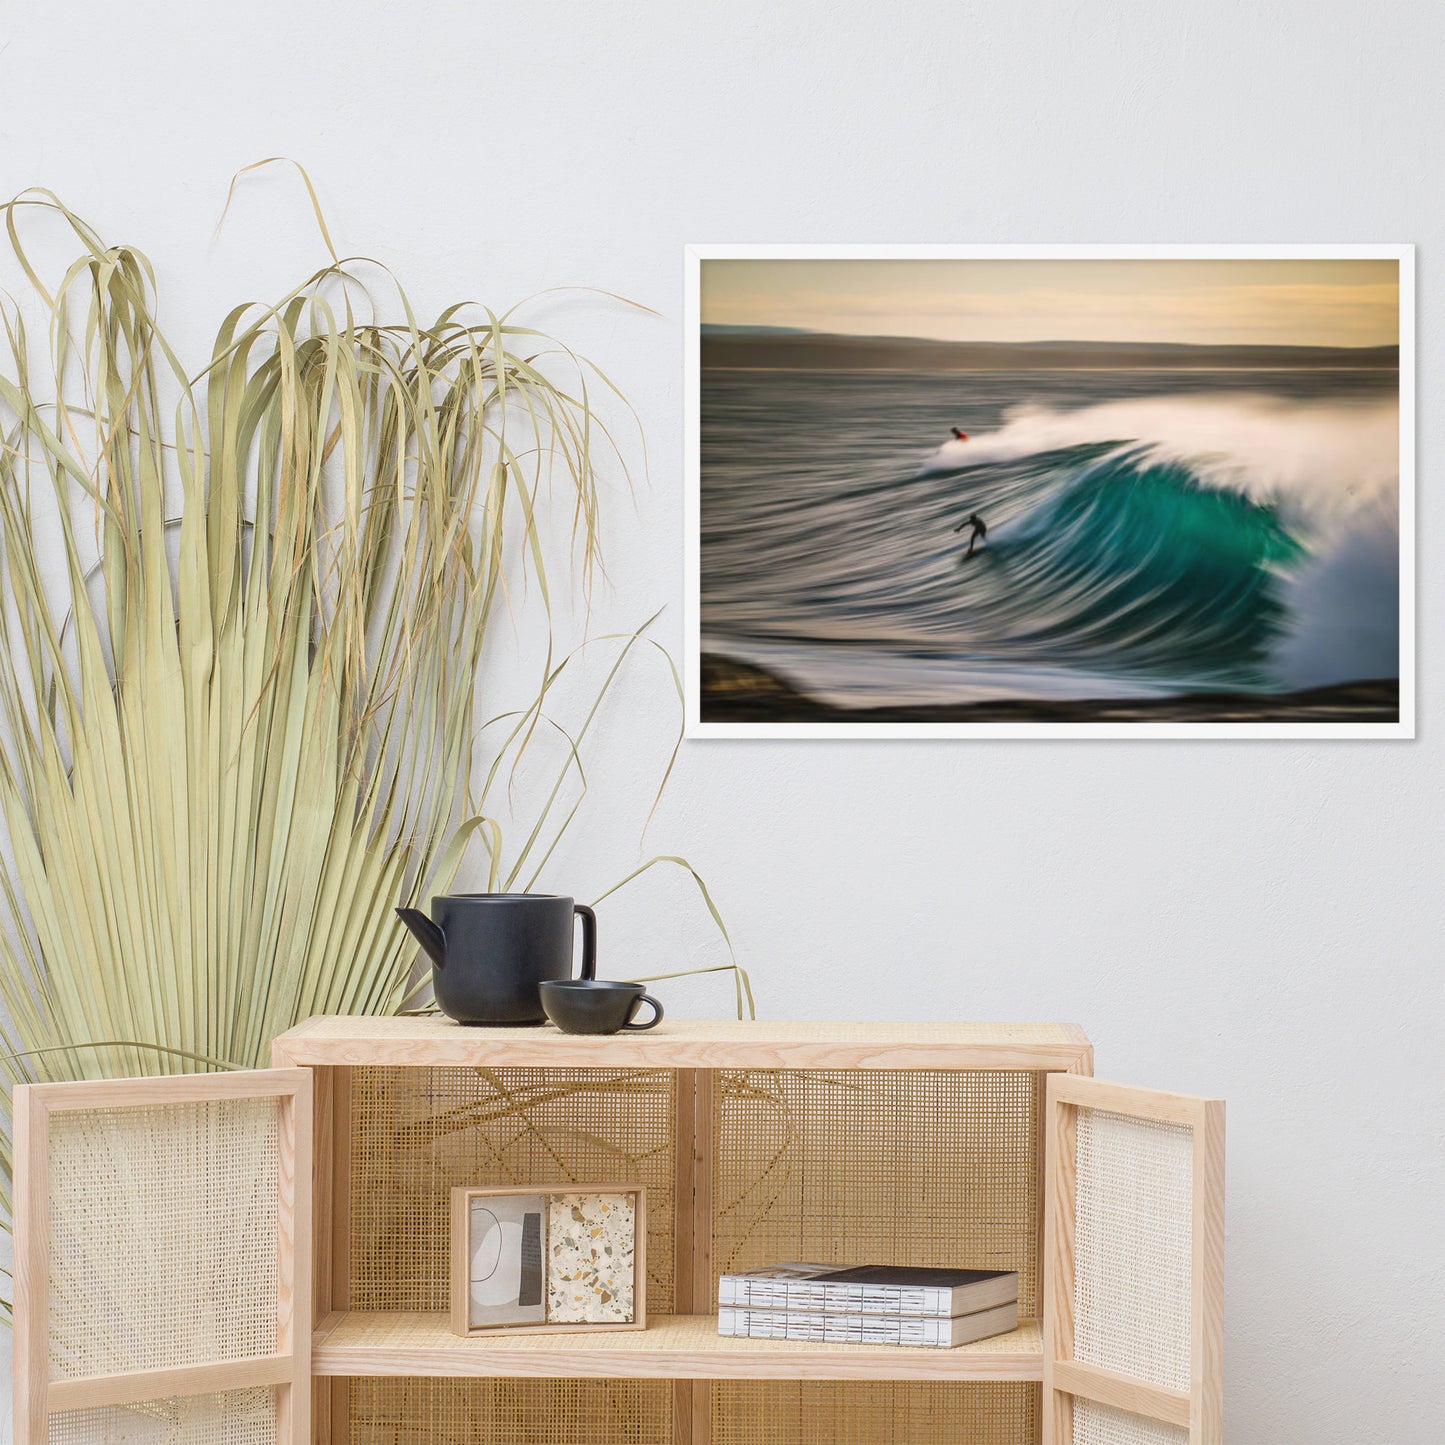 A Surfer's Dance with Light Coastal Lifestyle / Abstract / Landscape Photograph Framed Wall Art Print